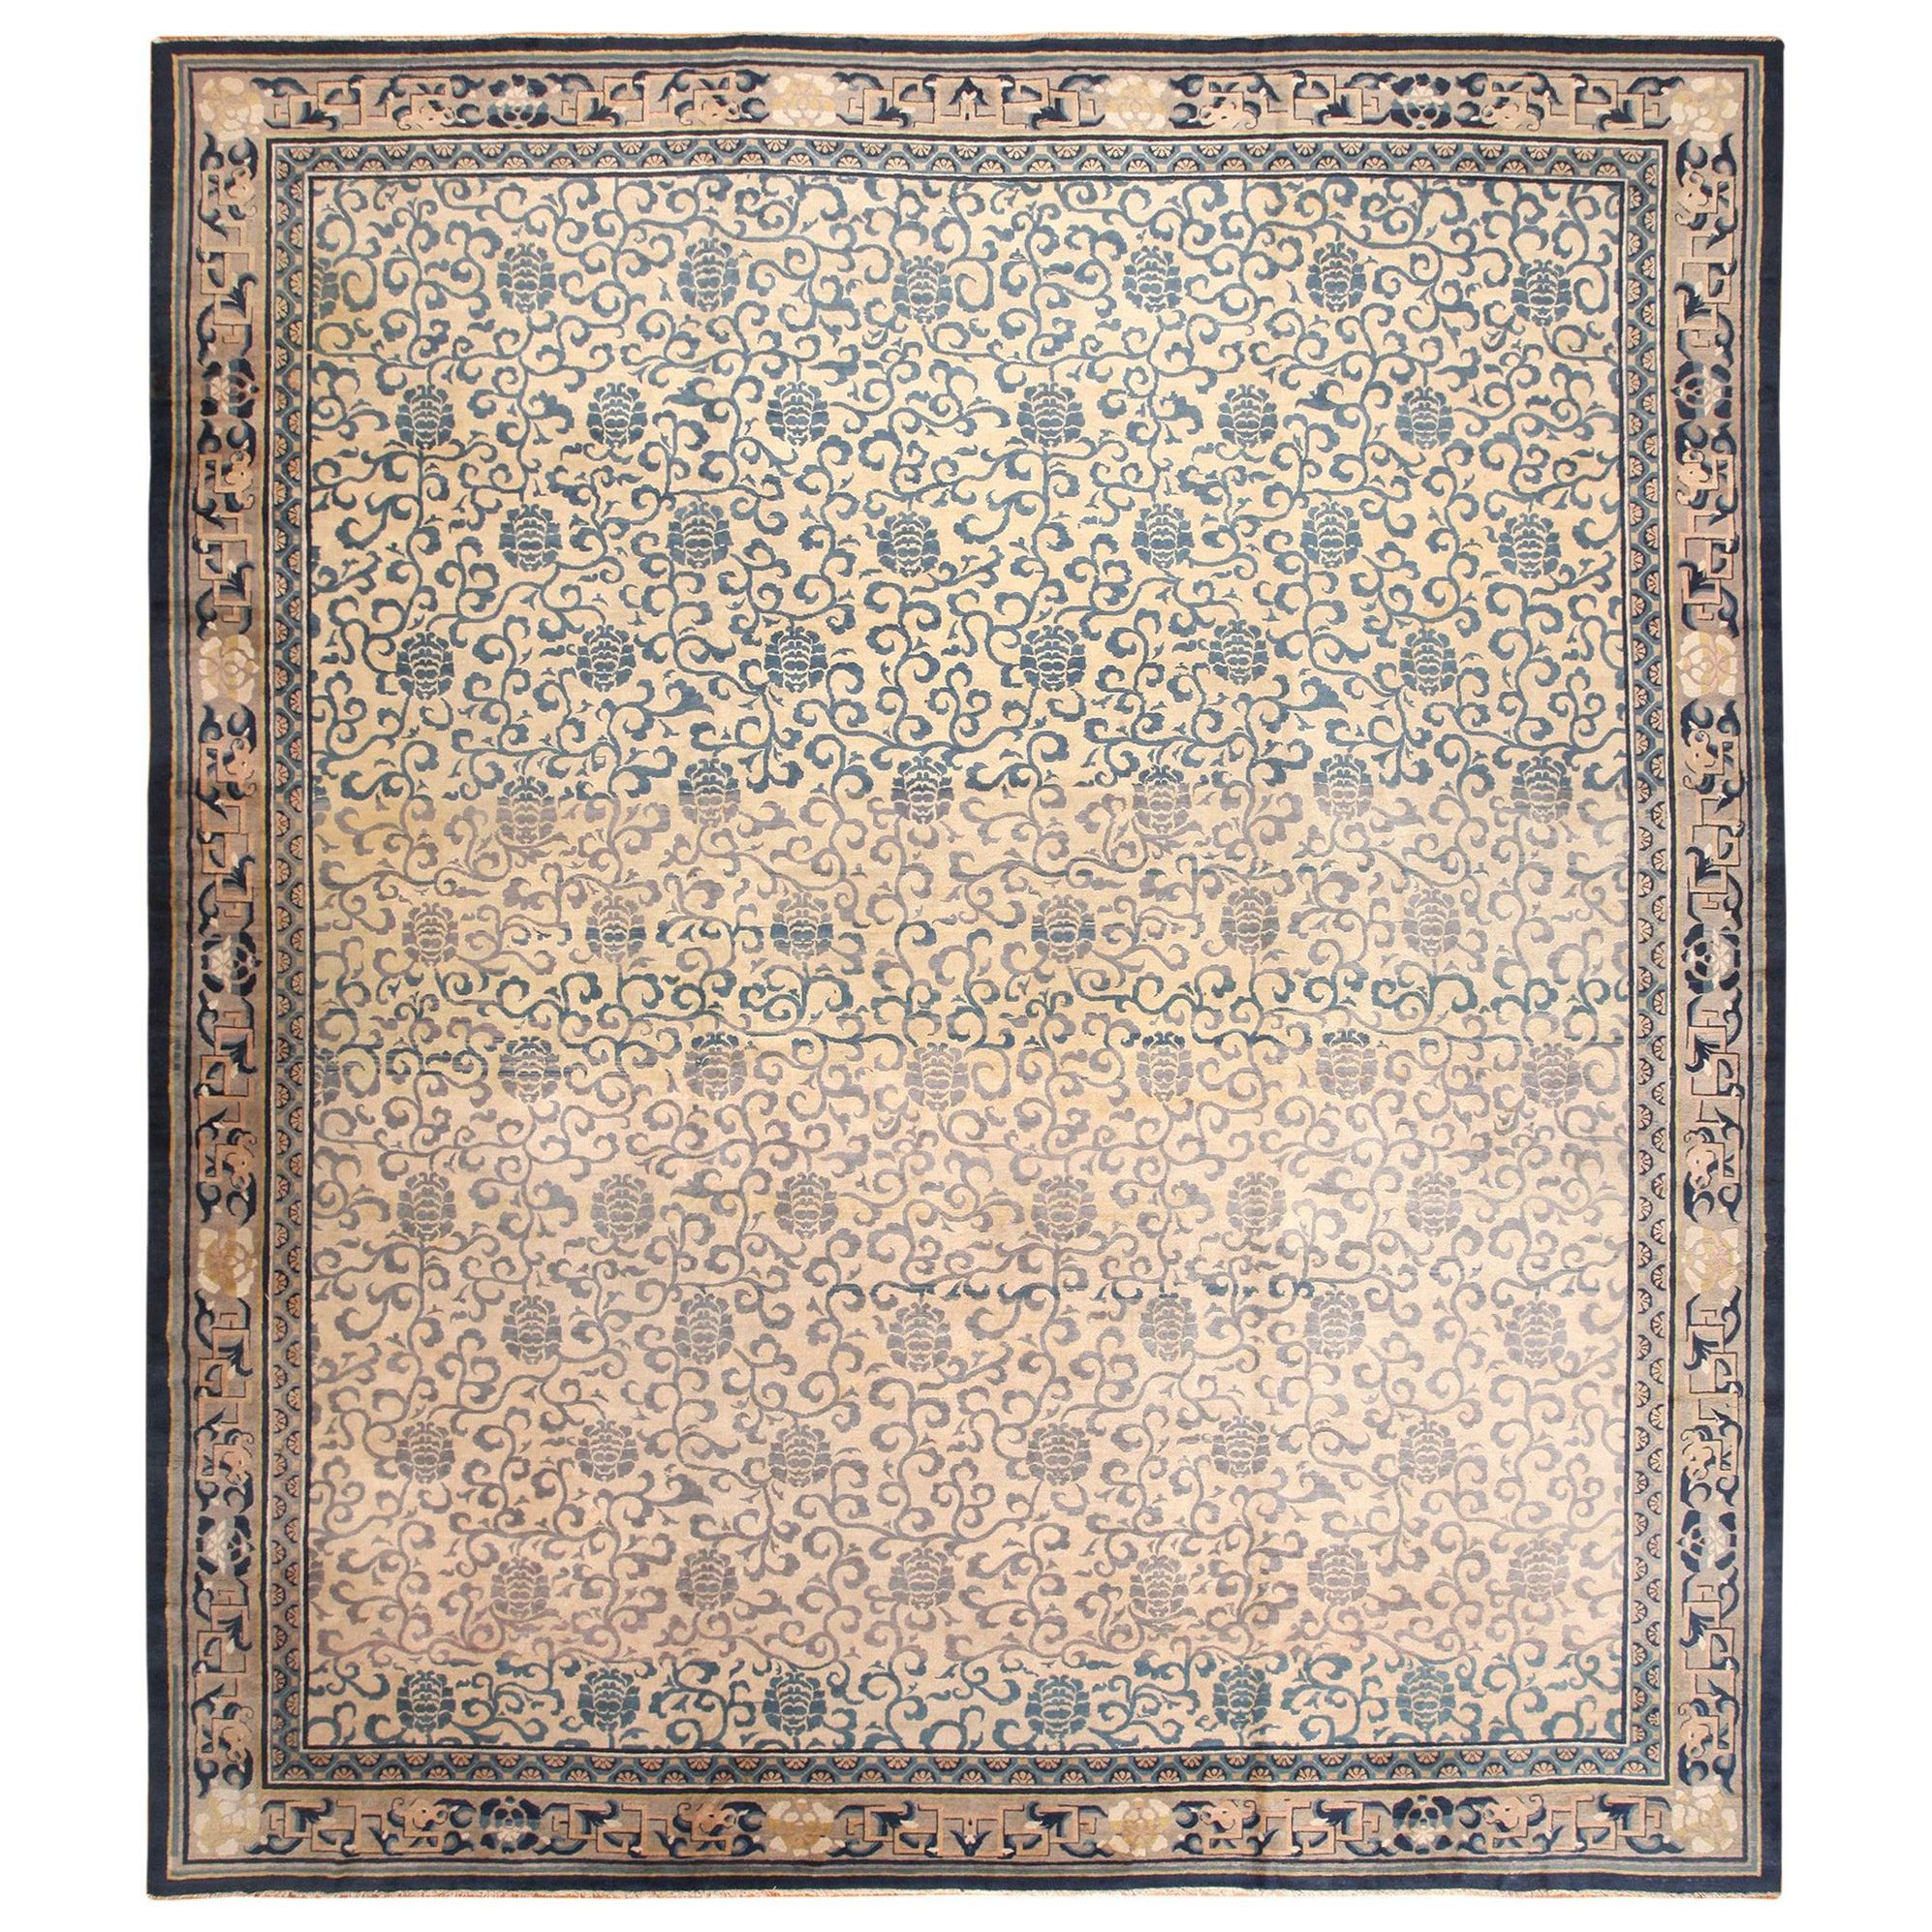 Tapis chinois ancien. 14 ft. 7 in x 17 ft. 4 in